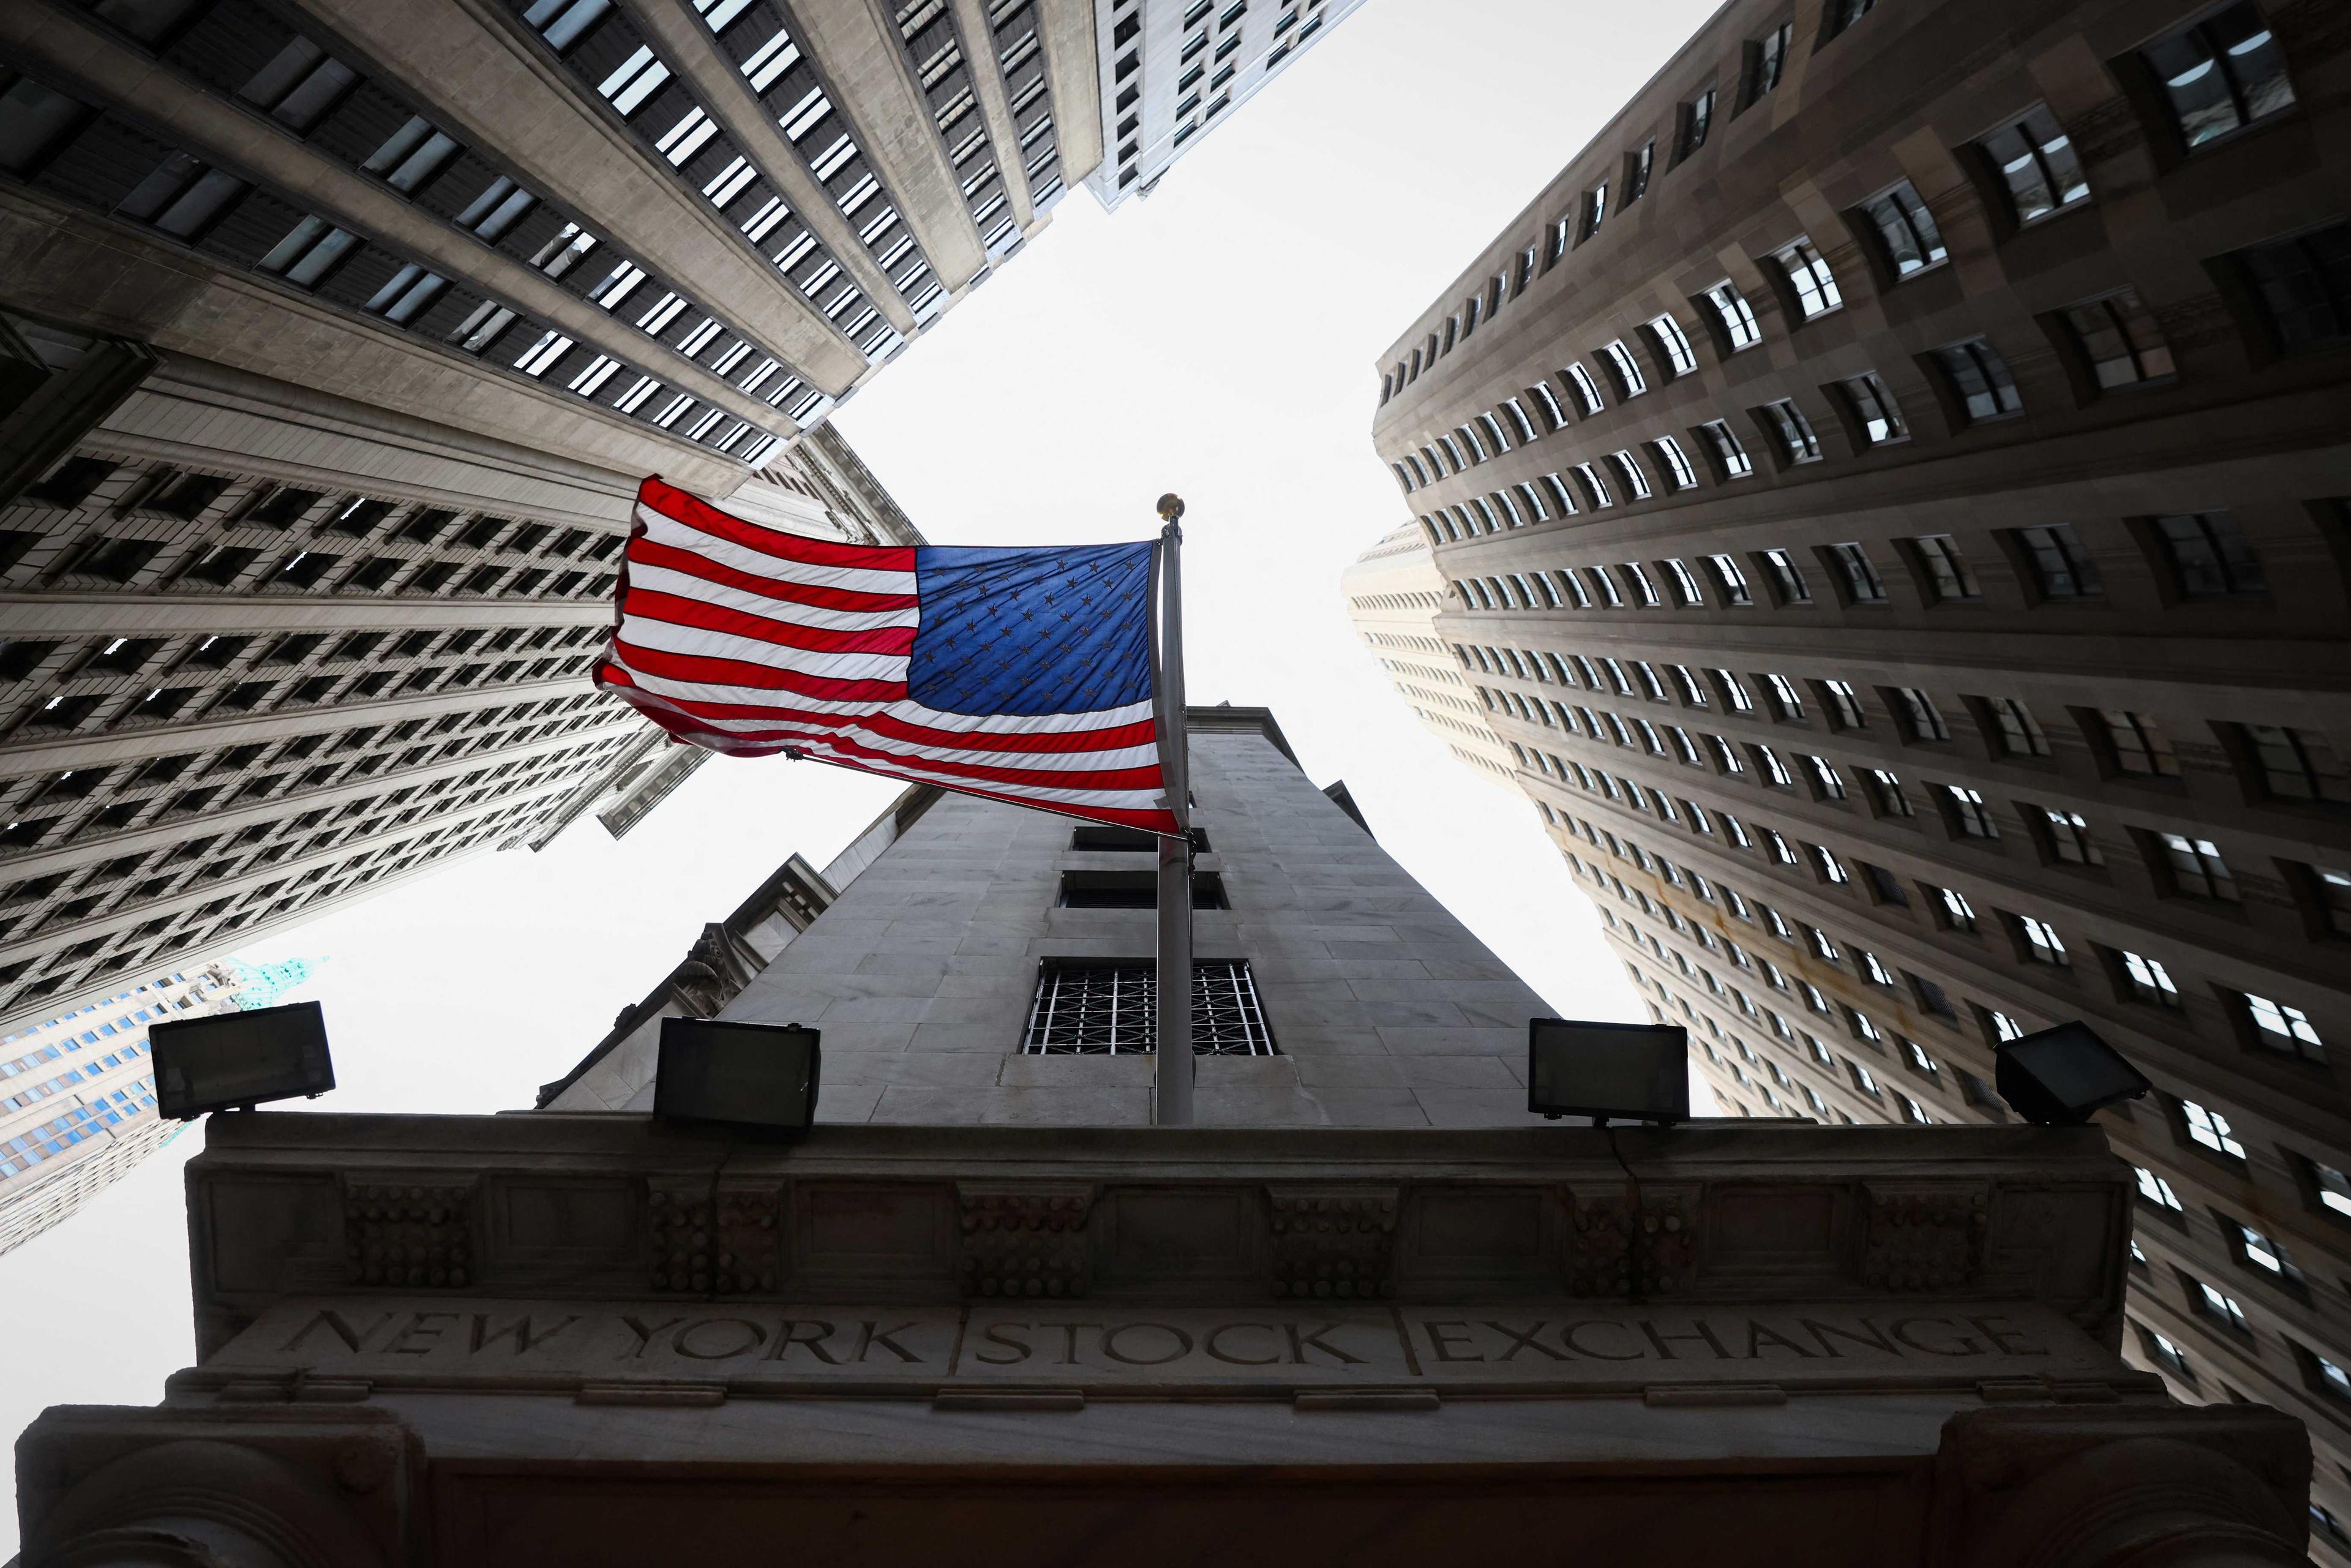 A US flag is seen outside the New York Stock Exchange (NYSE) in New York City, US, Jan 26. Photo: Reuters